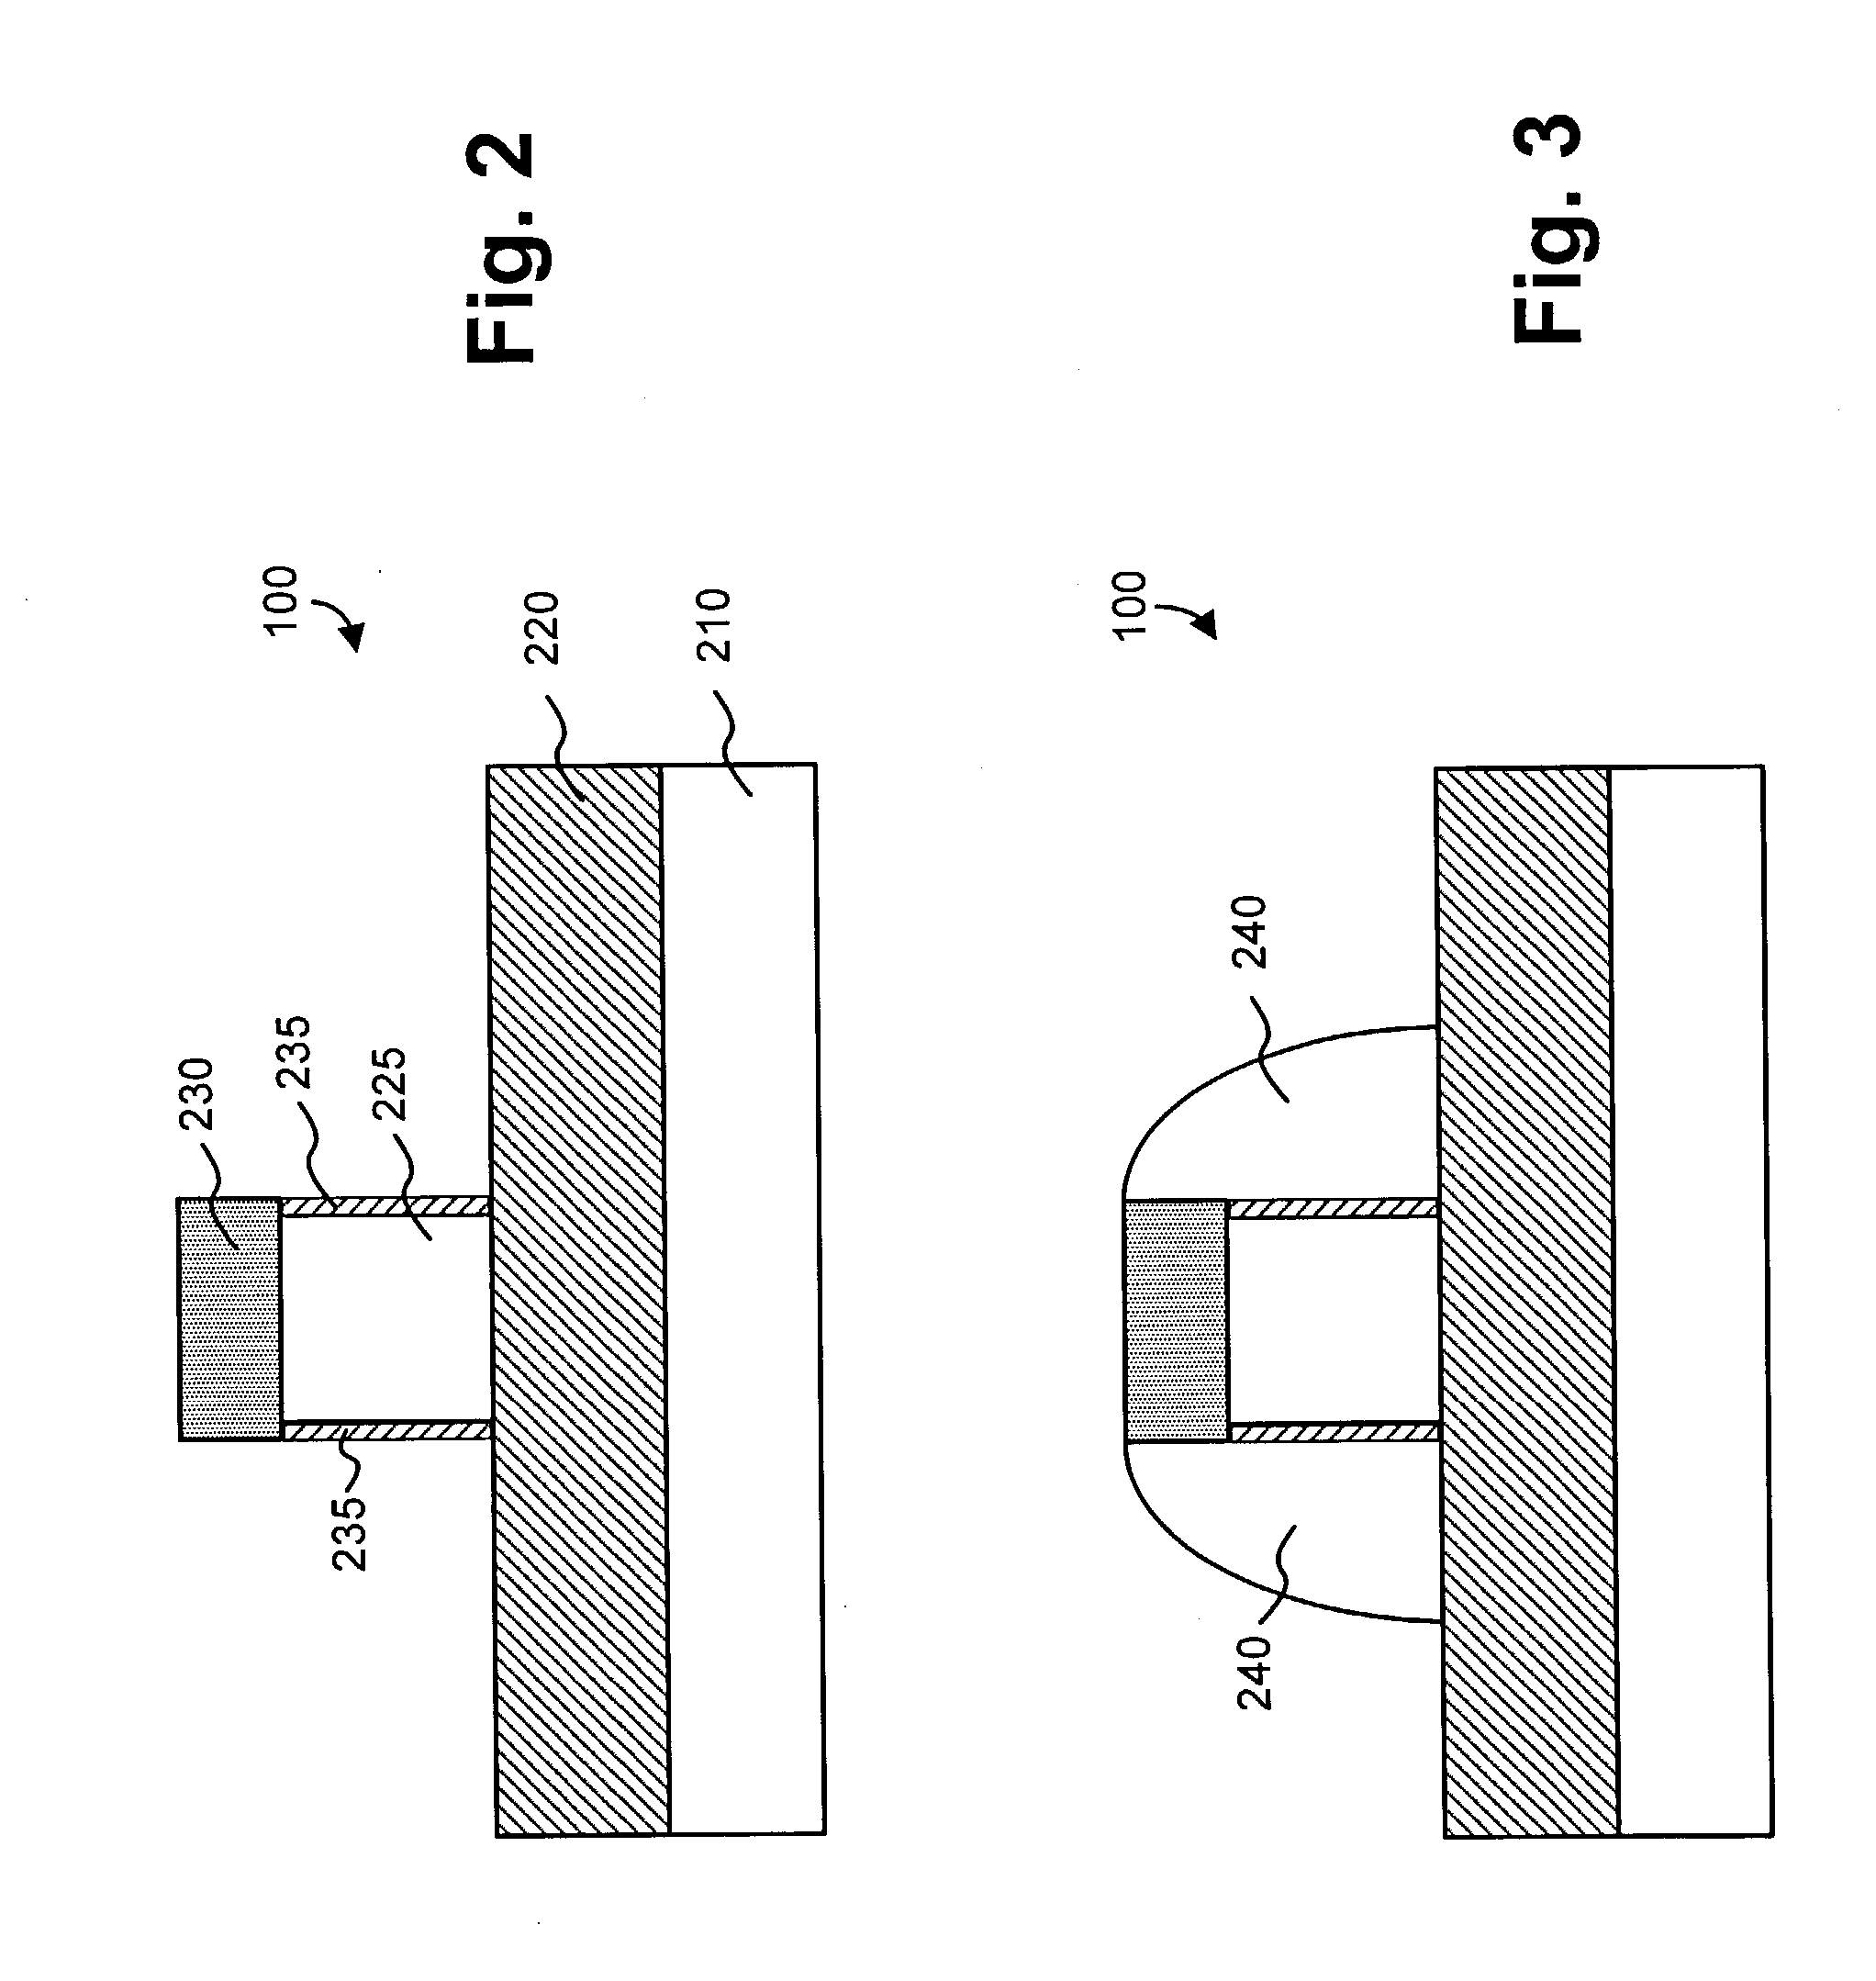 Two transistor nor device